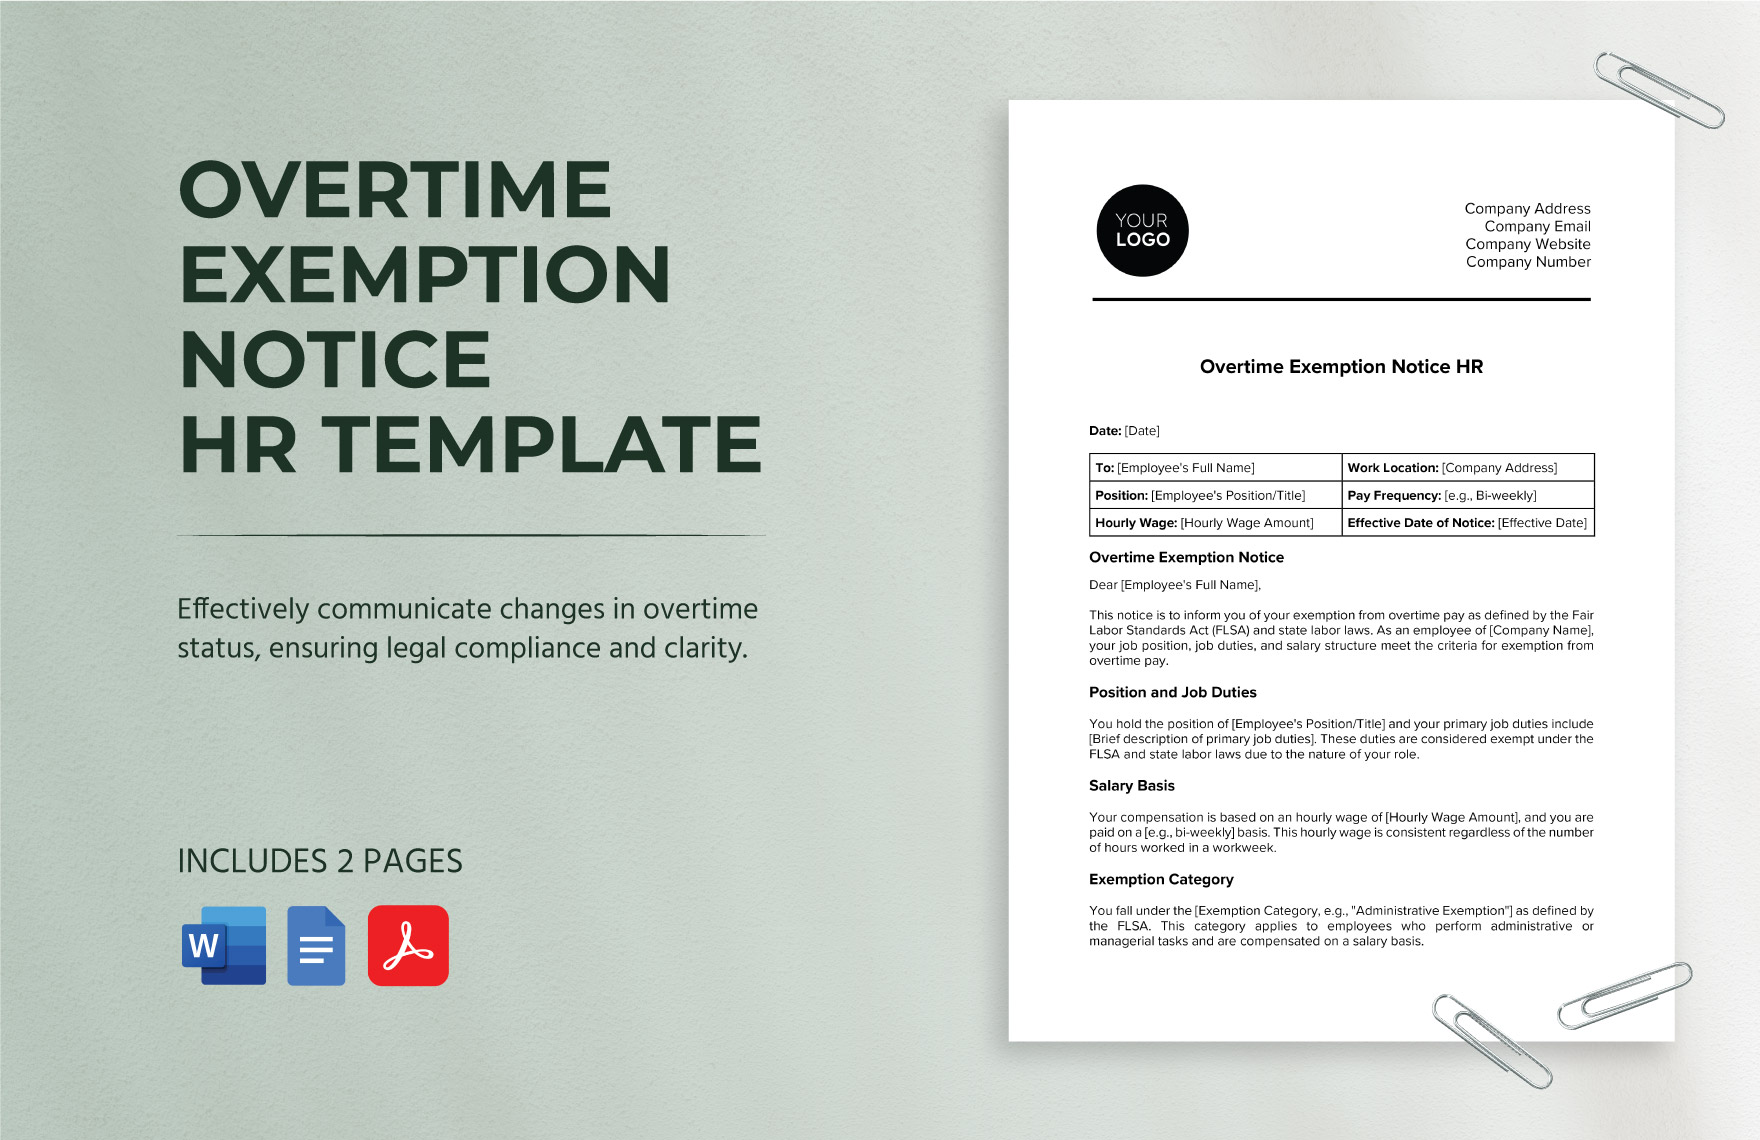 Overtime Exemption Notice HR Template